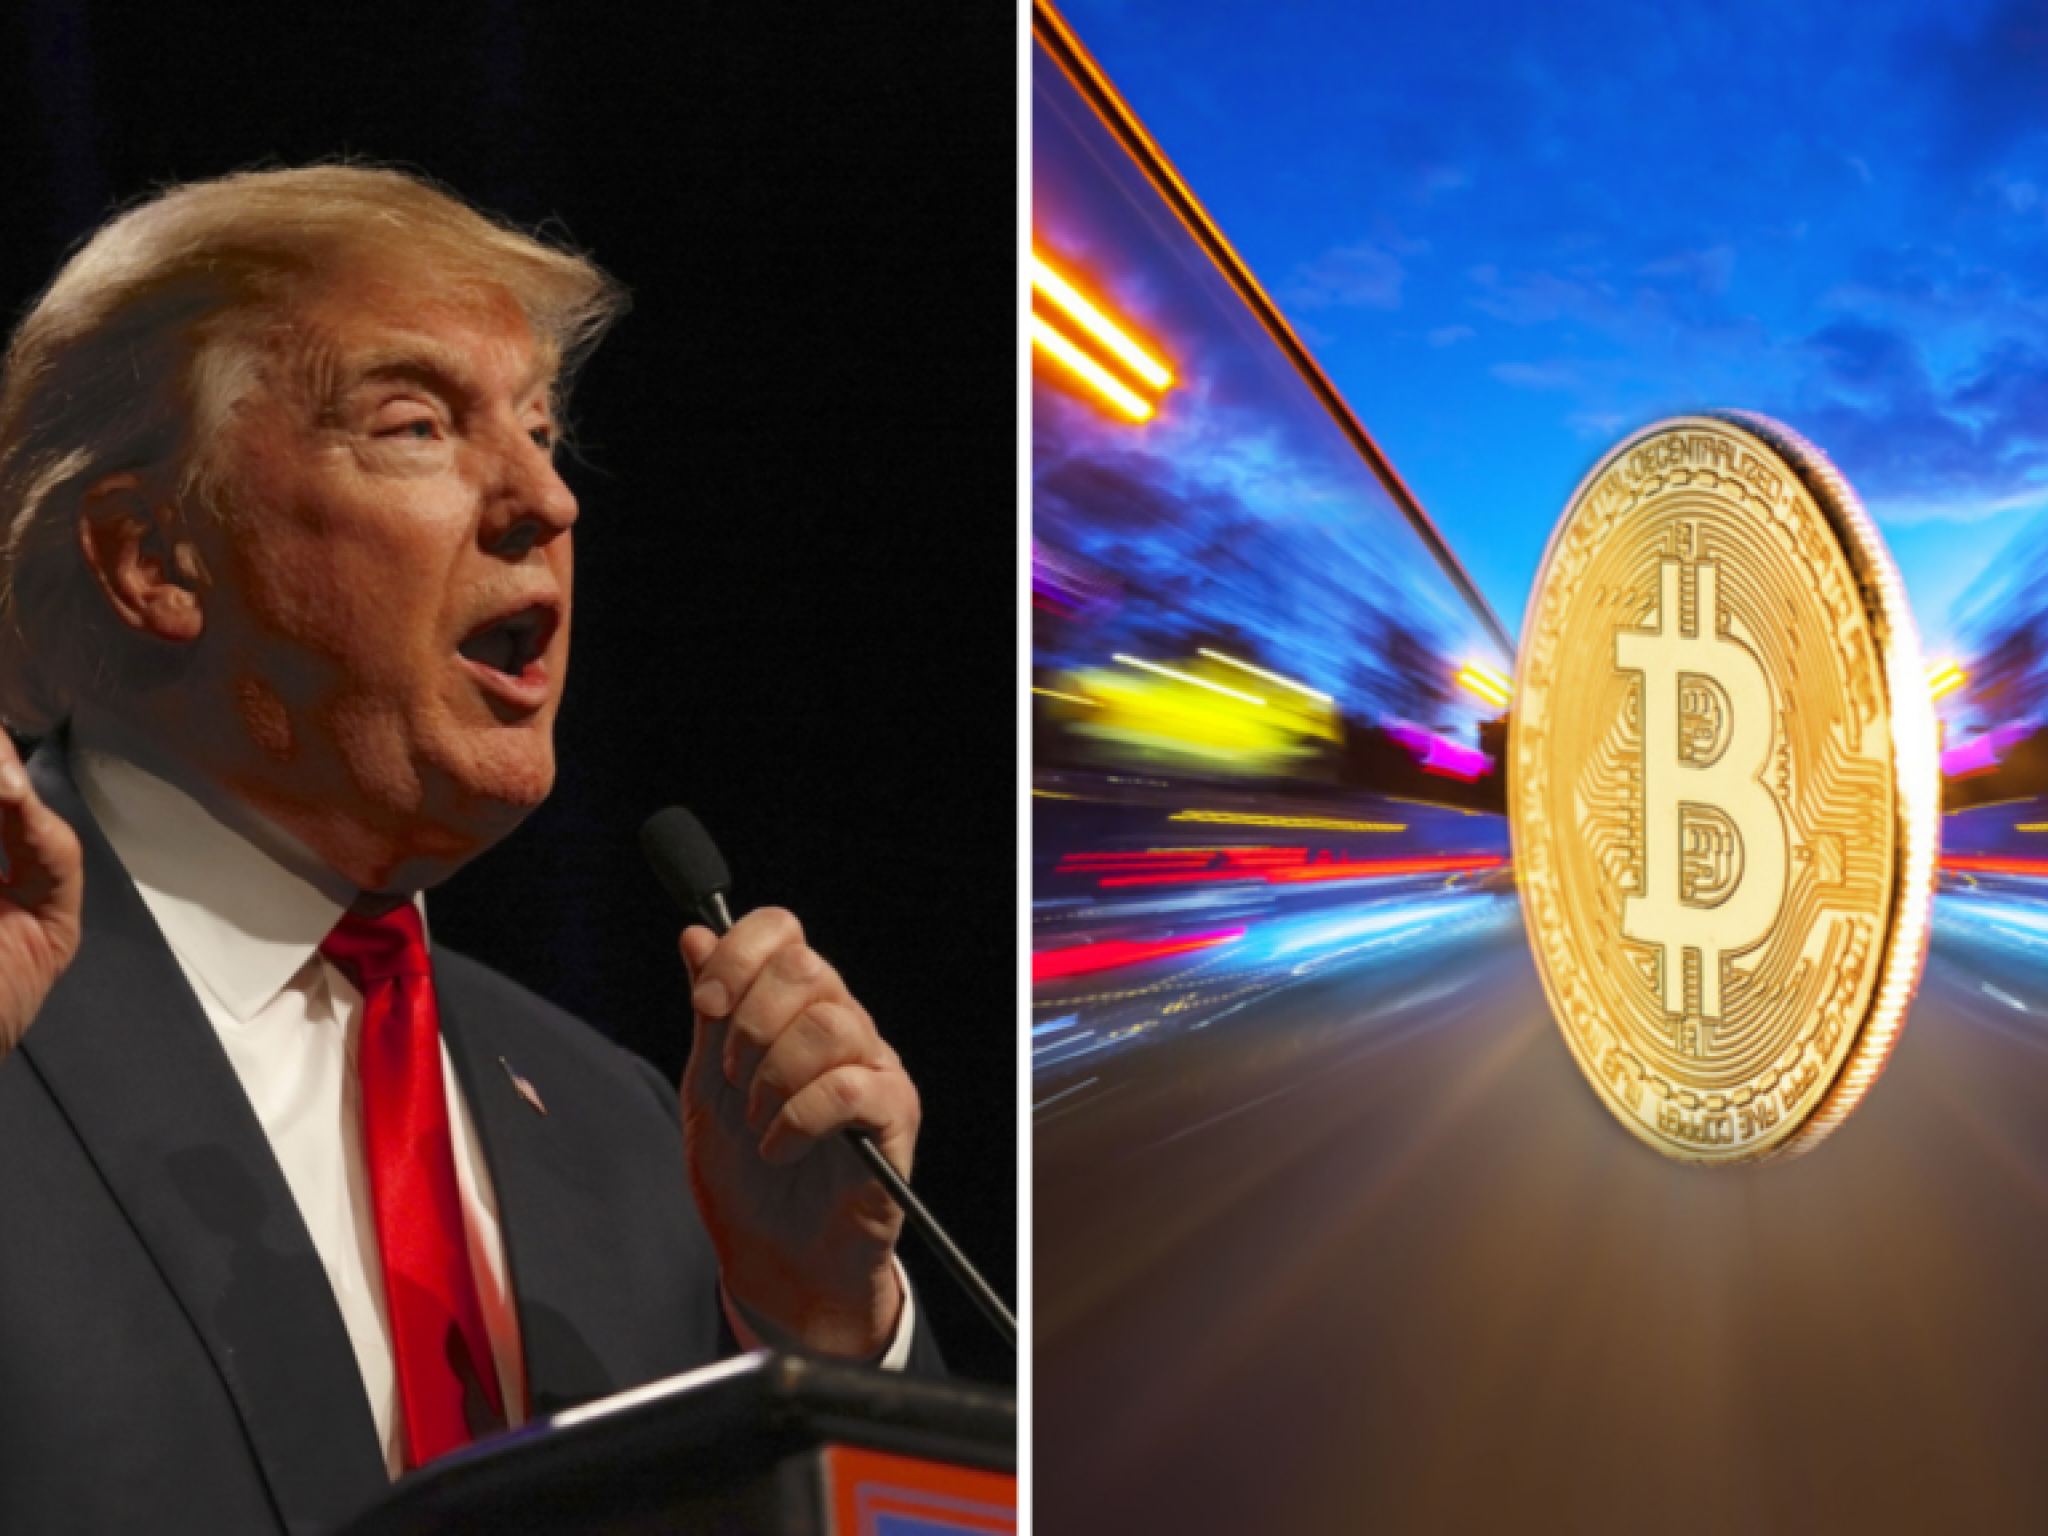  bitcoin-now-political-force-says-michael-saylor-reacting-to-video-of-trumps-pro-crypto-vp-pick-jd-vance 